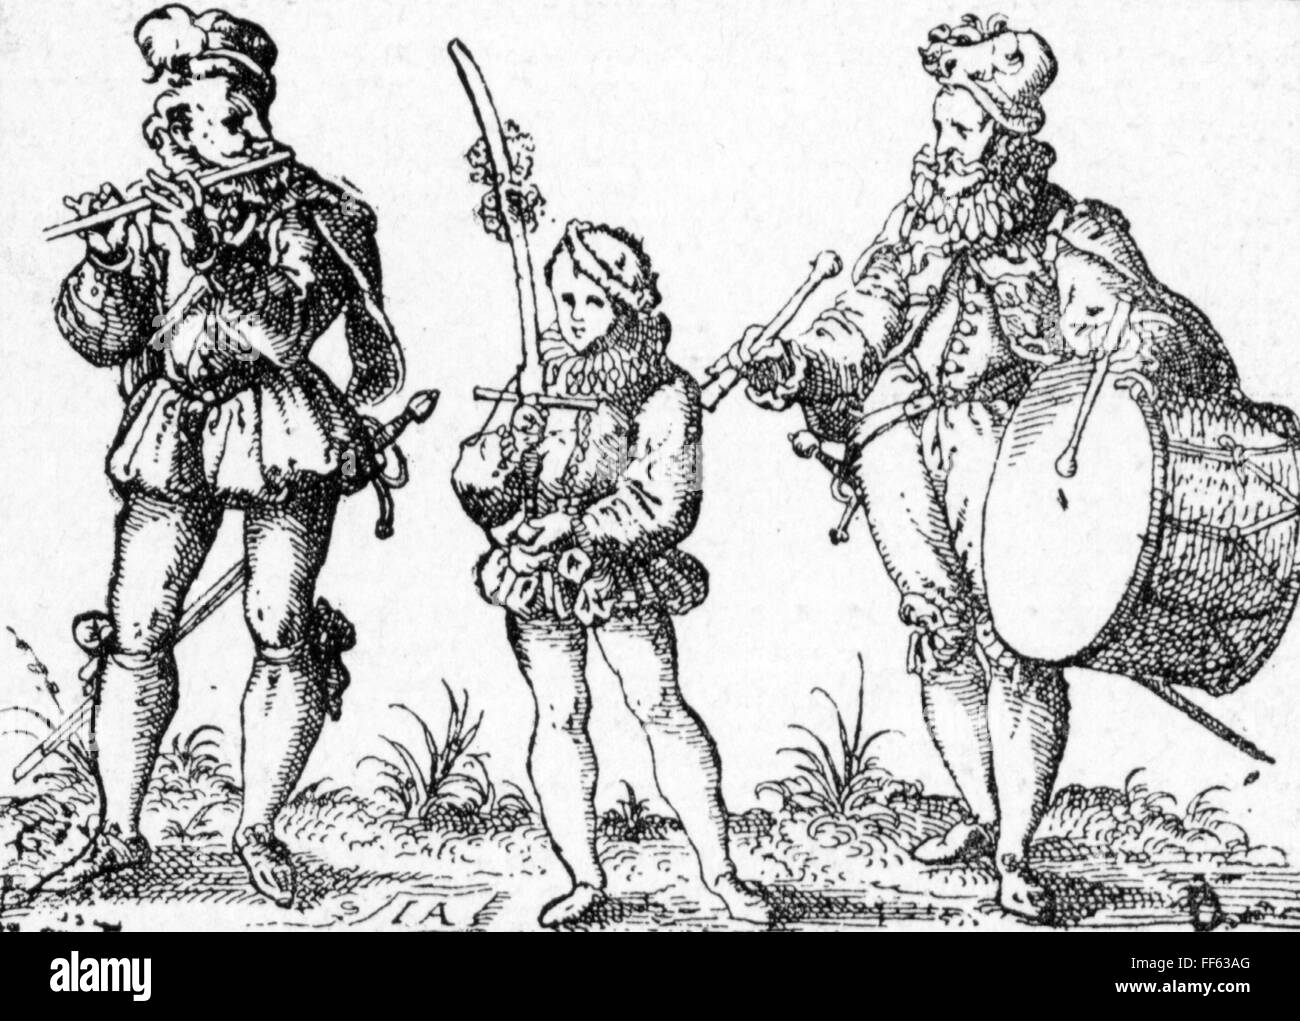 music, musician, bandsman, flute player and drummer, in between a boy with a sabre, copper engraving, 16th century, flutist, flutists, whistler, whistlers, drum player, drum, drums, pipe, pipes, transverse flute, transverse flutes, musical instrument, musical instruments, key, keys, wind instruments, wind instrument, aerophone, percussion instrument, percussion instruments, membranophone, make music, play music, making music, playing music, makes music, plays music, made music, played music, playing, play, fashion, clothes, headpiece, headpieces, hat, , Artist's Copyright has not to be cleared Stock Photo